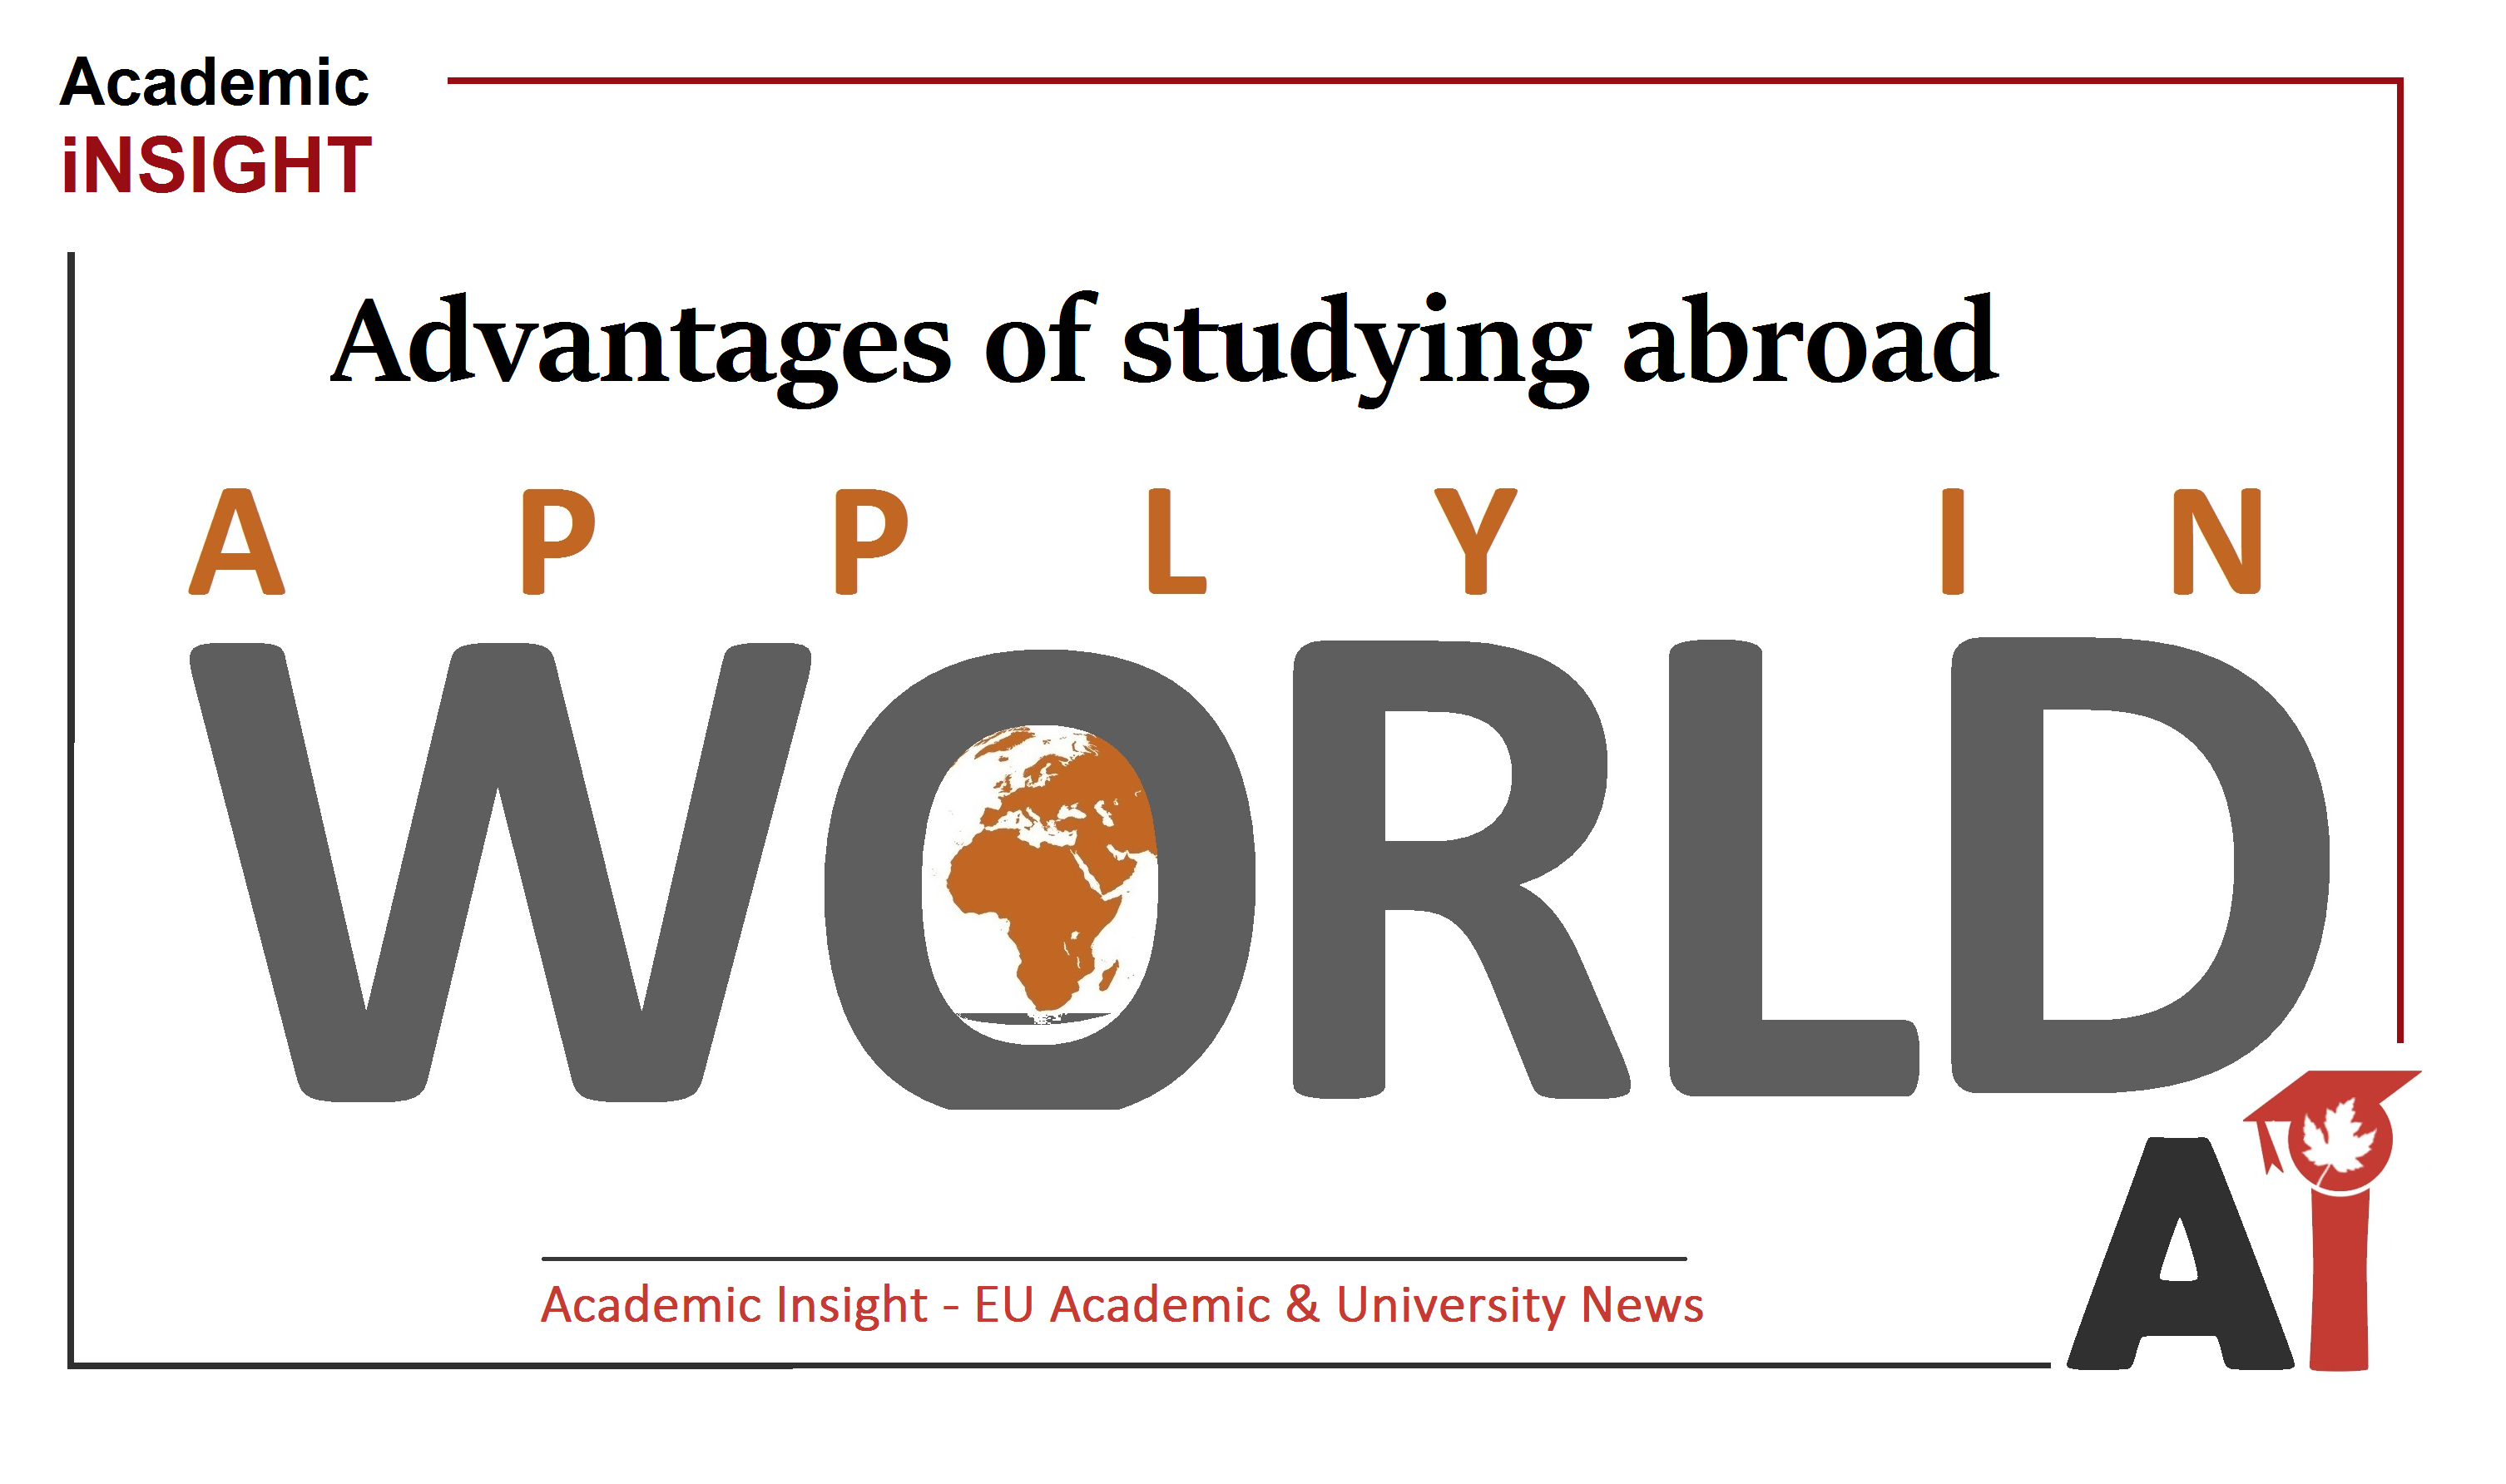 Studying Abroad if Affordable: Challenges and Advantages